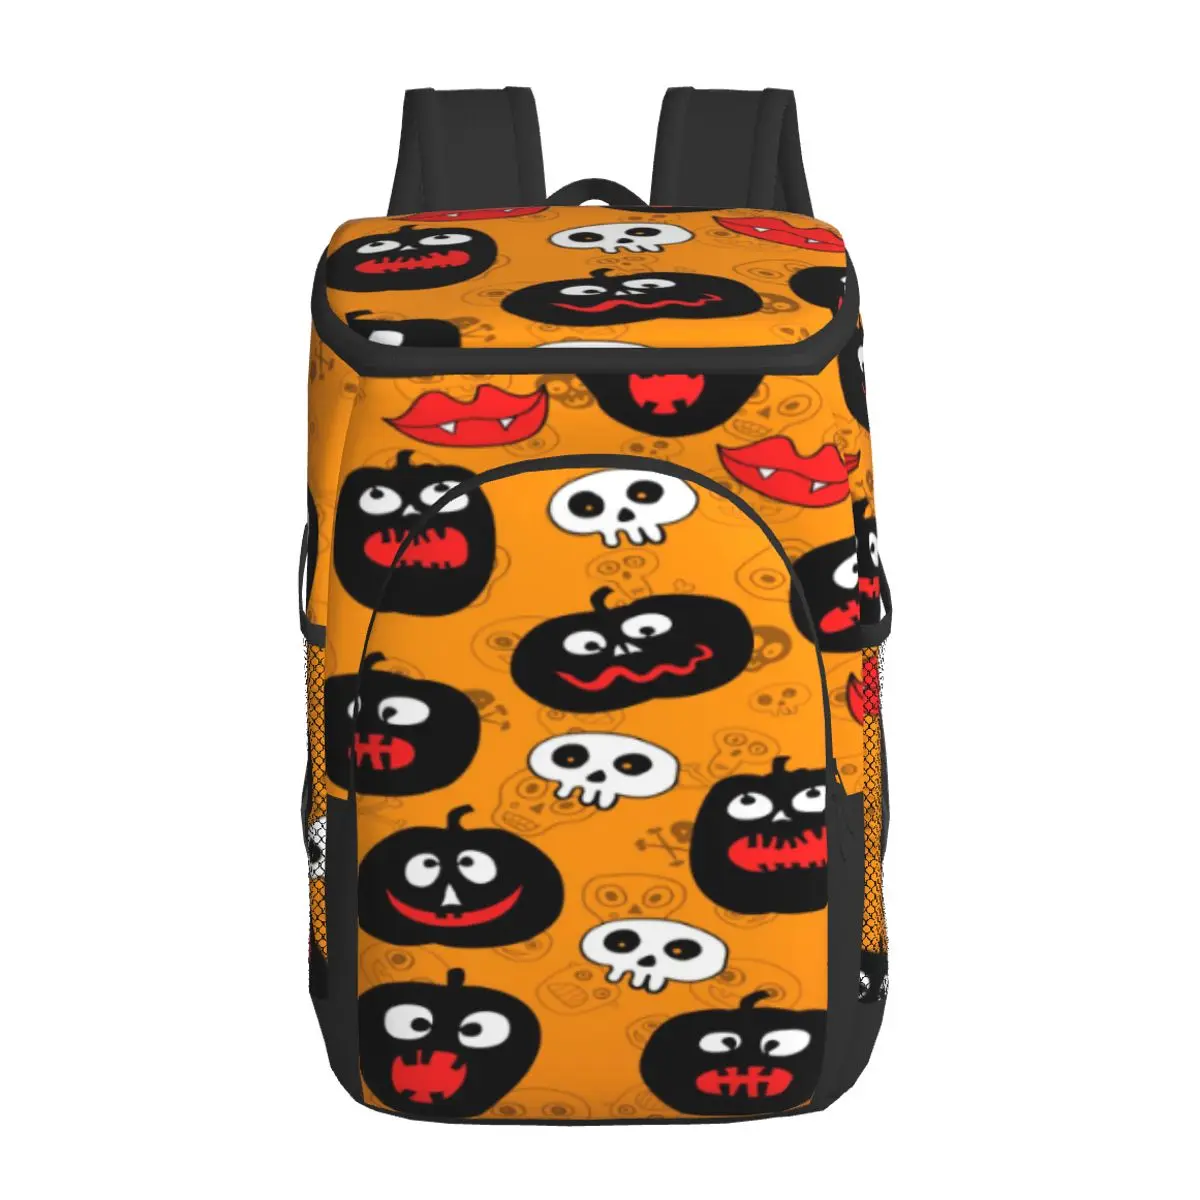 protable insulated thermal cooler waterproof lunch bag pumpkin the day of the dead picnic camping backpack double shoulder bag free global shipping